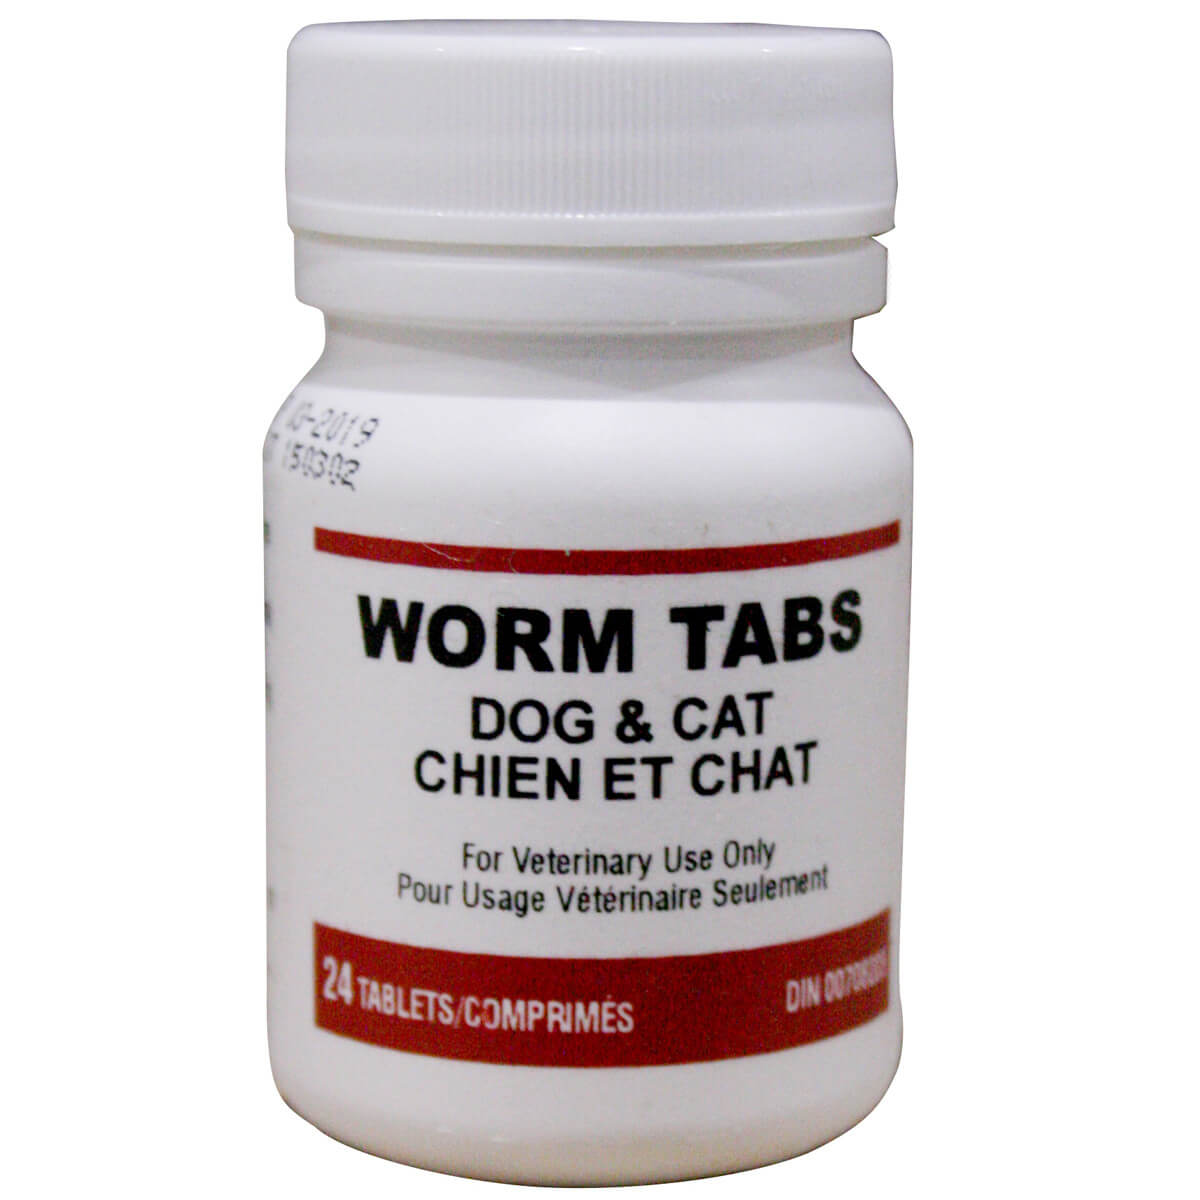 Worm Tabs for Dogs or Cats - 24 Pack